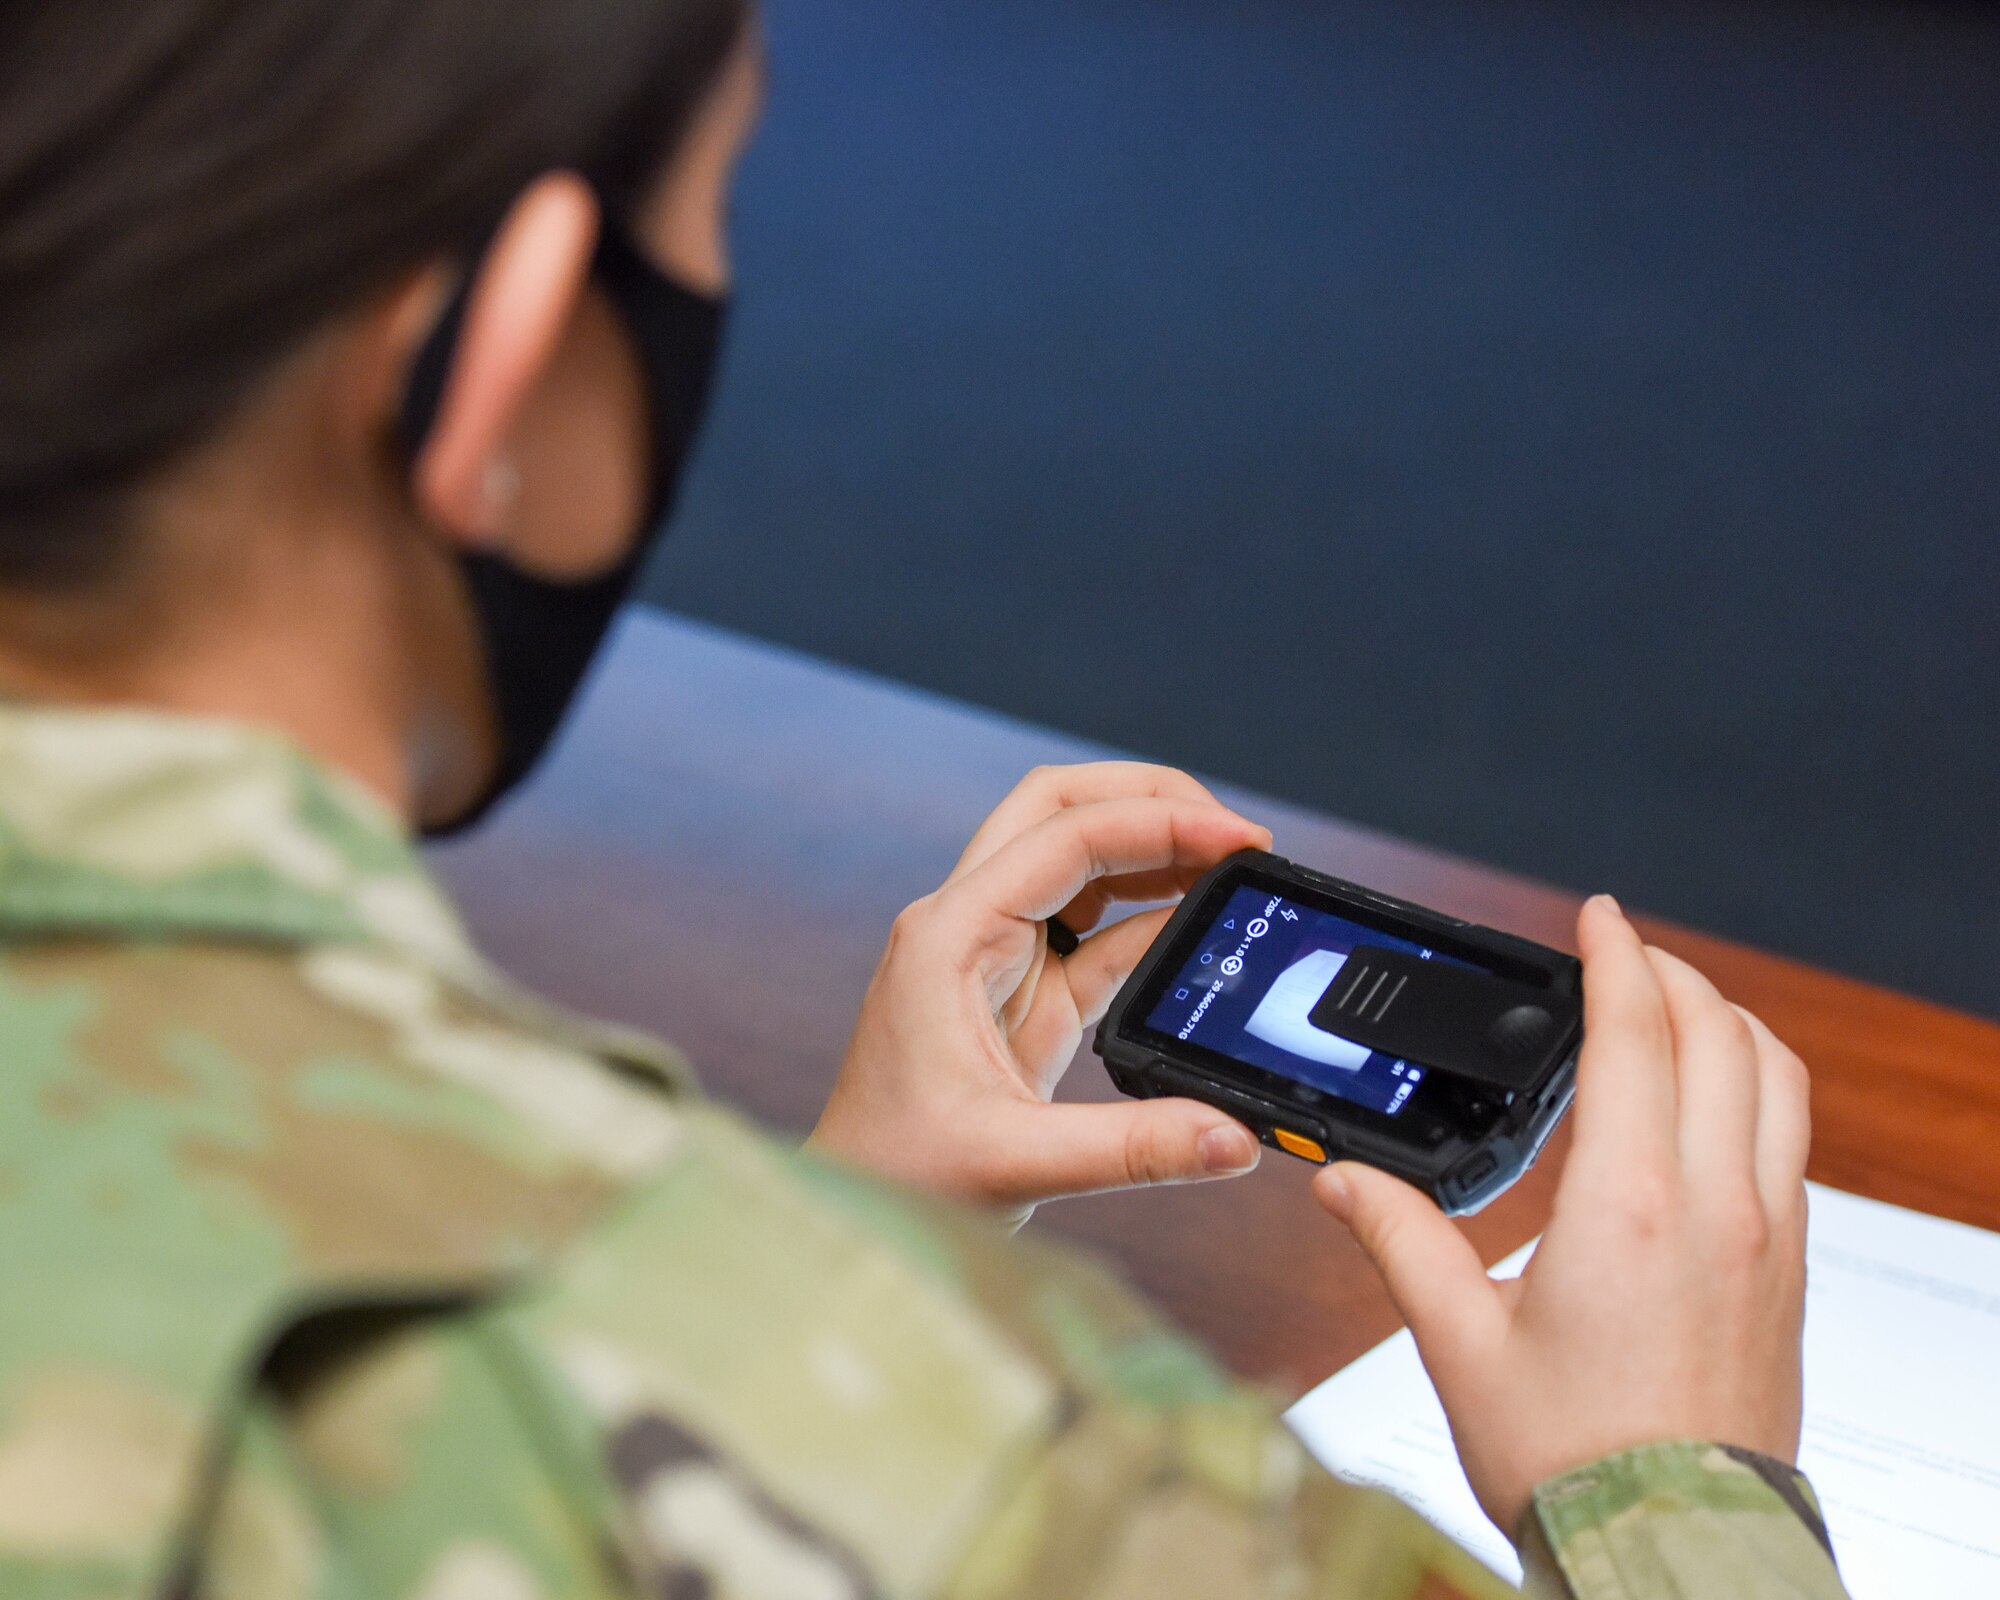 U.S. Air Force Airman 1st Class Kelly Griffith, a 673d Security Forces Squadron patrolman, presses buttons on a new body camera to become familiar with the device's features during a training day Jan. 6, 2021, at Joint Base Elmendorf-Richardson, Alaska. The 673d SFS has begun integrating 60 new, high-tech body cameras into daily operations after the adaptable technology reached a point of not only being a reliable safety and training instrument, but a multifunctional accountability tool serving all. (U.S. Air Force photo by Senior Airman Crystal A. Jenkins)